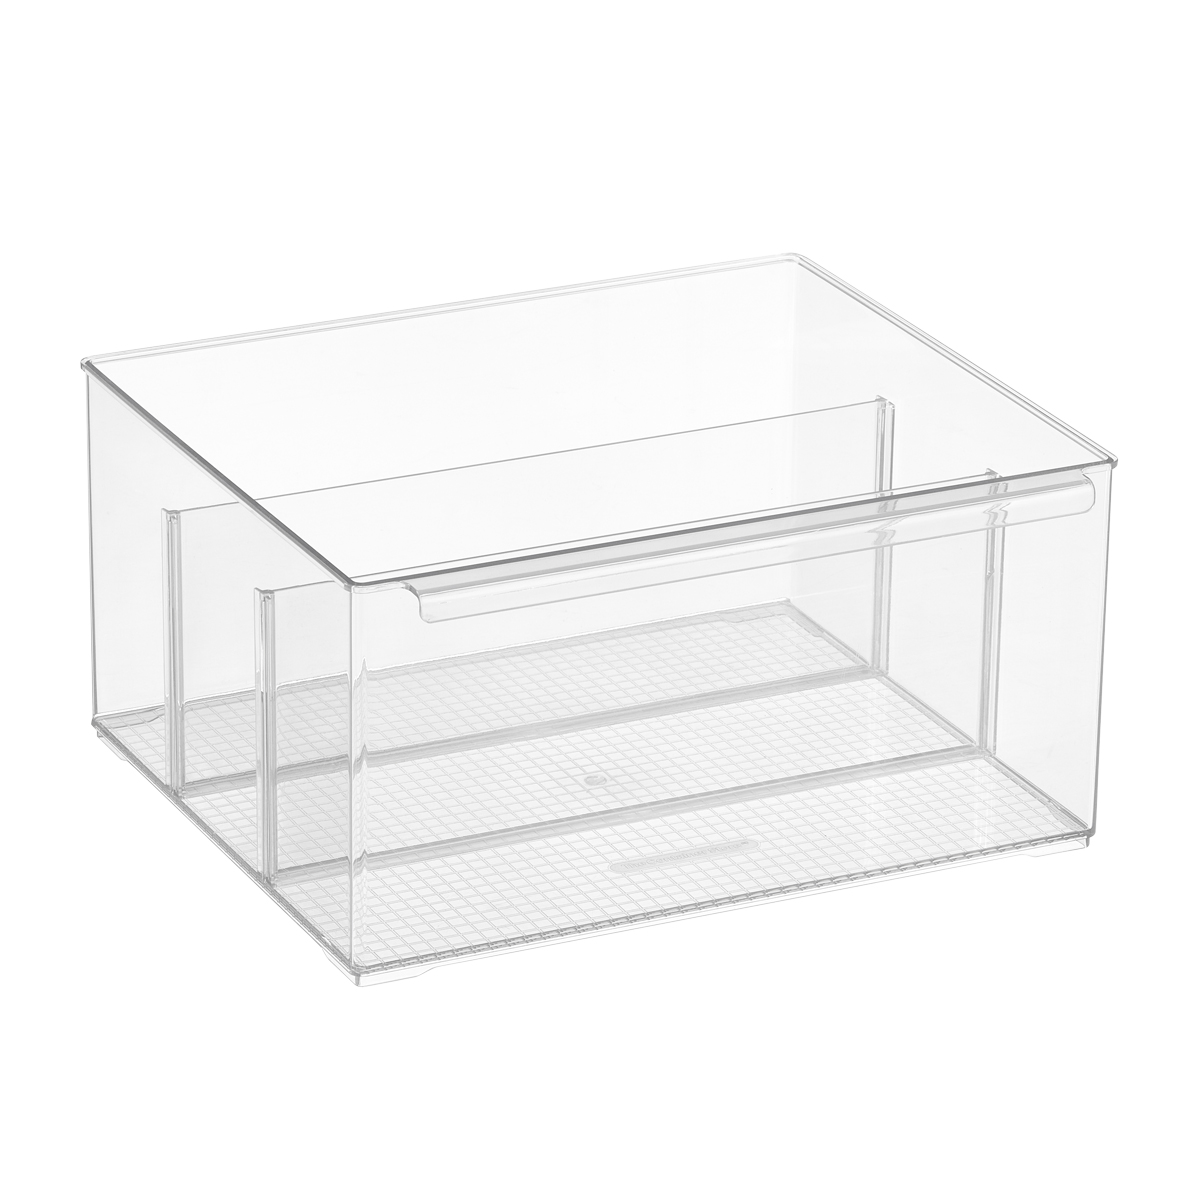 https://www.containerstore.com/catalogimages/439726/10087165_11_Inch_Modular_Pantry_Bin_.jpg